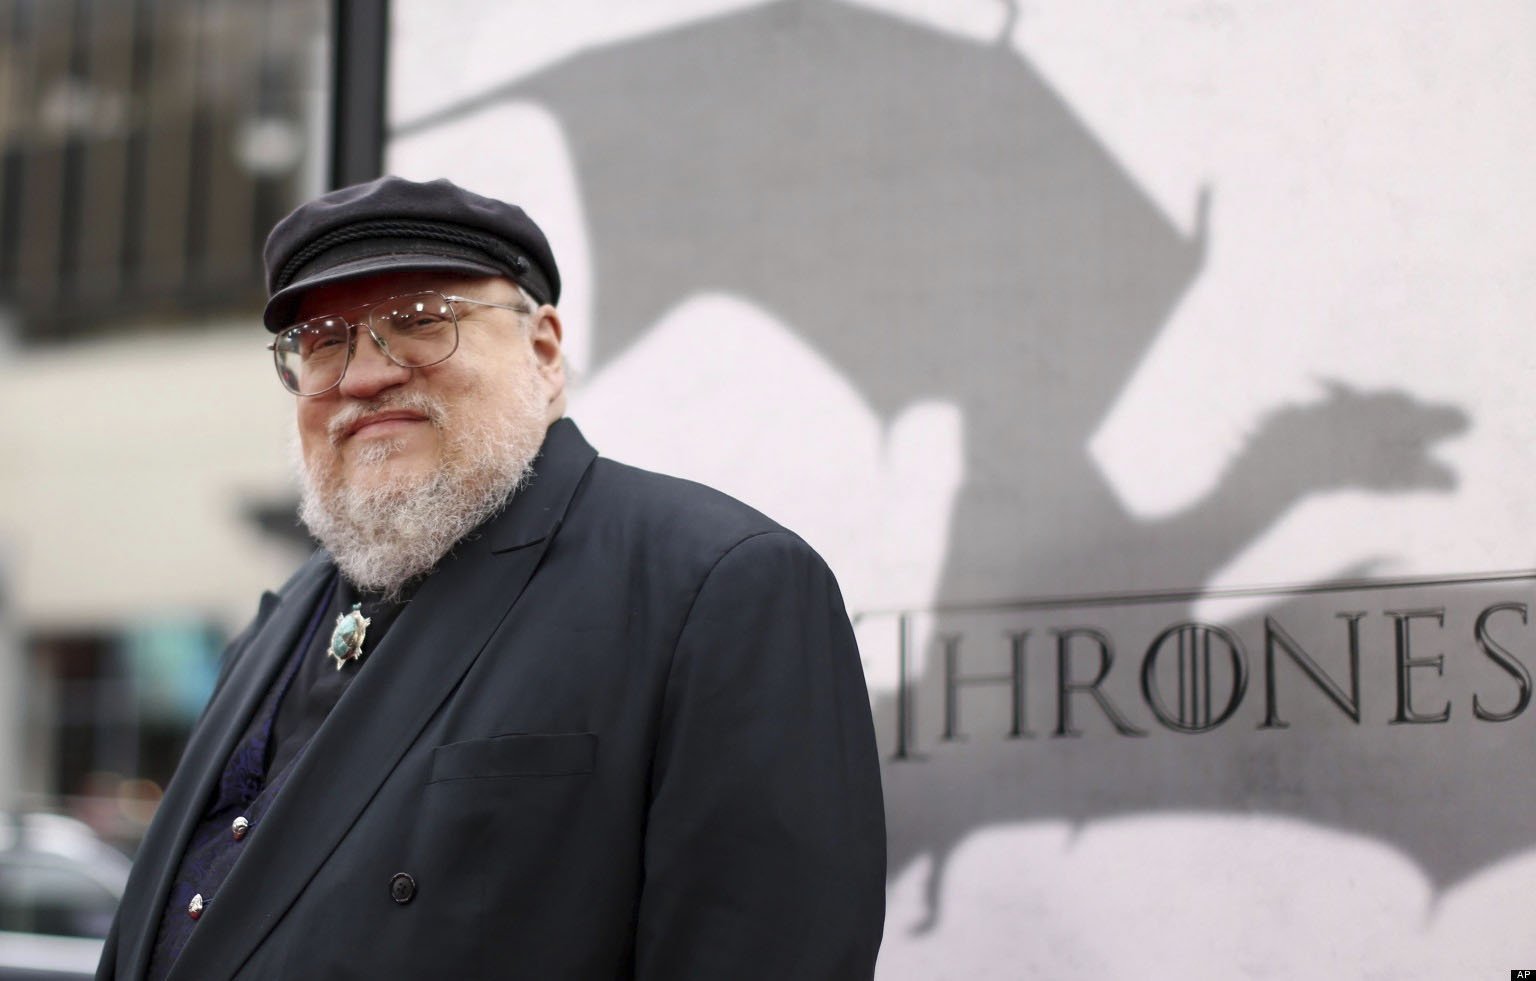 Author George R.R. Martin arrives at the premiere for the third season of the HBO television series "Game of Thrones" at the TCL Chinese Theatre in Los Angeles, U.S., March 18, 2013. (AP Photo)